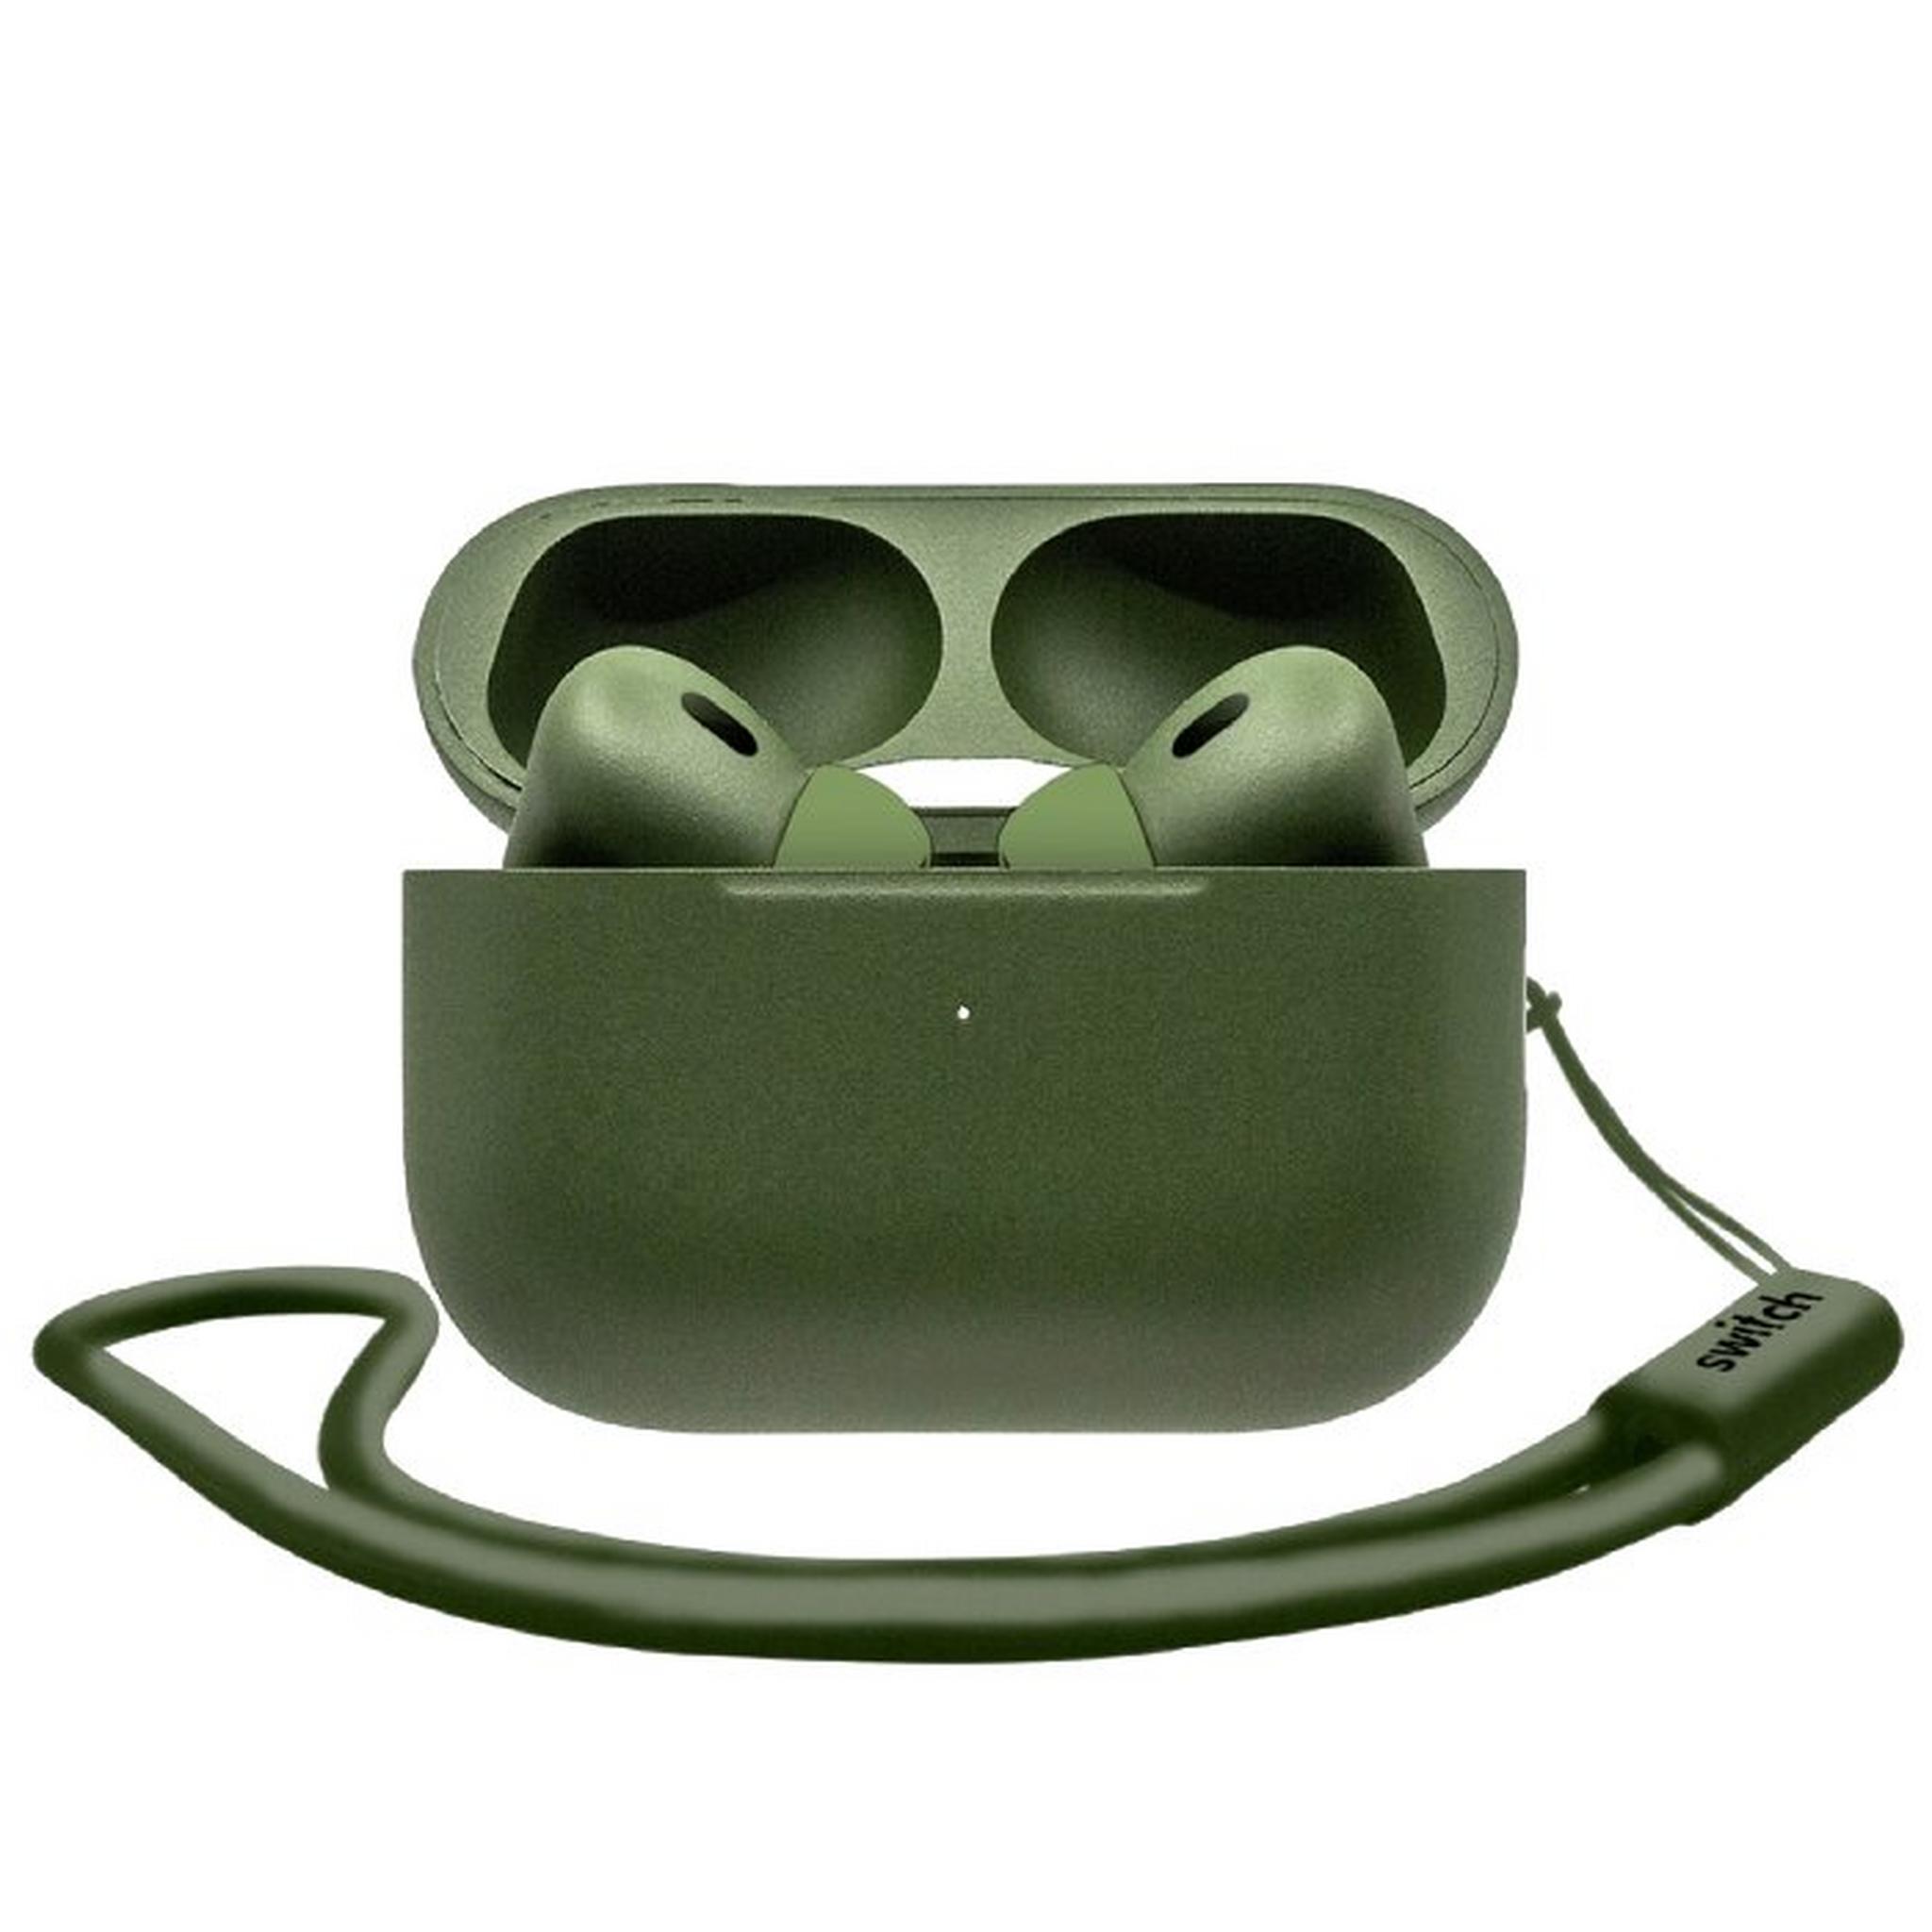 SWITCH Apple AirPods Pro Gen 2 Exclusive Army Green, ROG2UCEXCPNTARGRGB – Green Matte